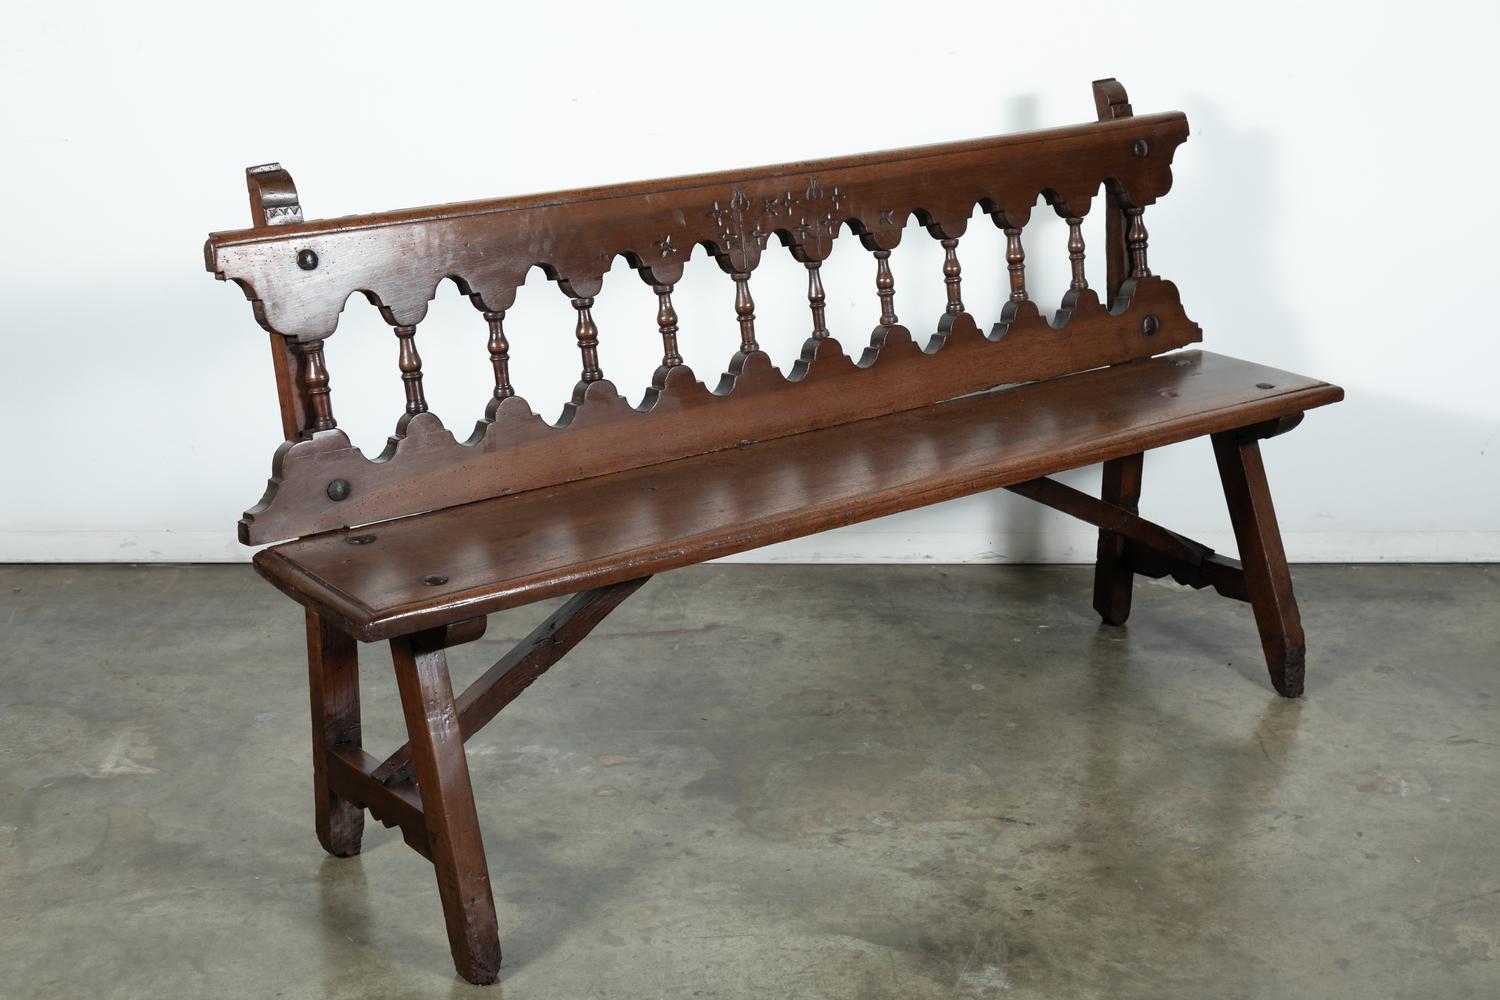 Rustic mid-19th century Spanish bench handcrafted of walnut in the Catalan region of Spain, having a carved back rail over a gallery of turned spindles, large iron nail heads, and a plank seat, circa 1850s. Raised on a trestle base joined by walnut